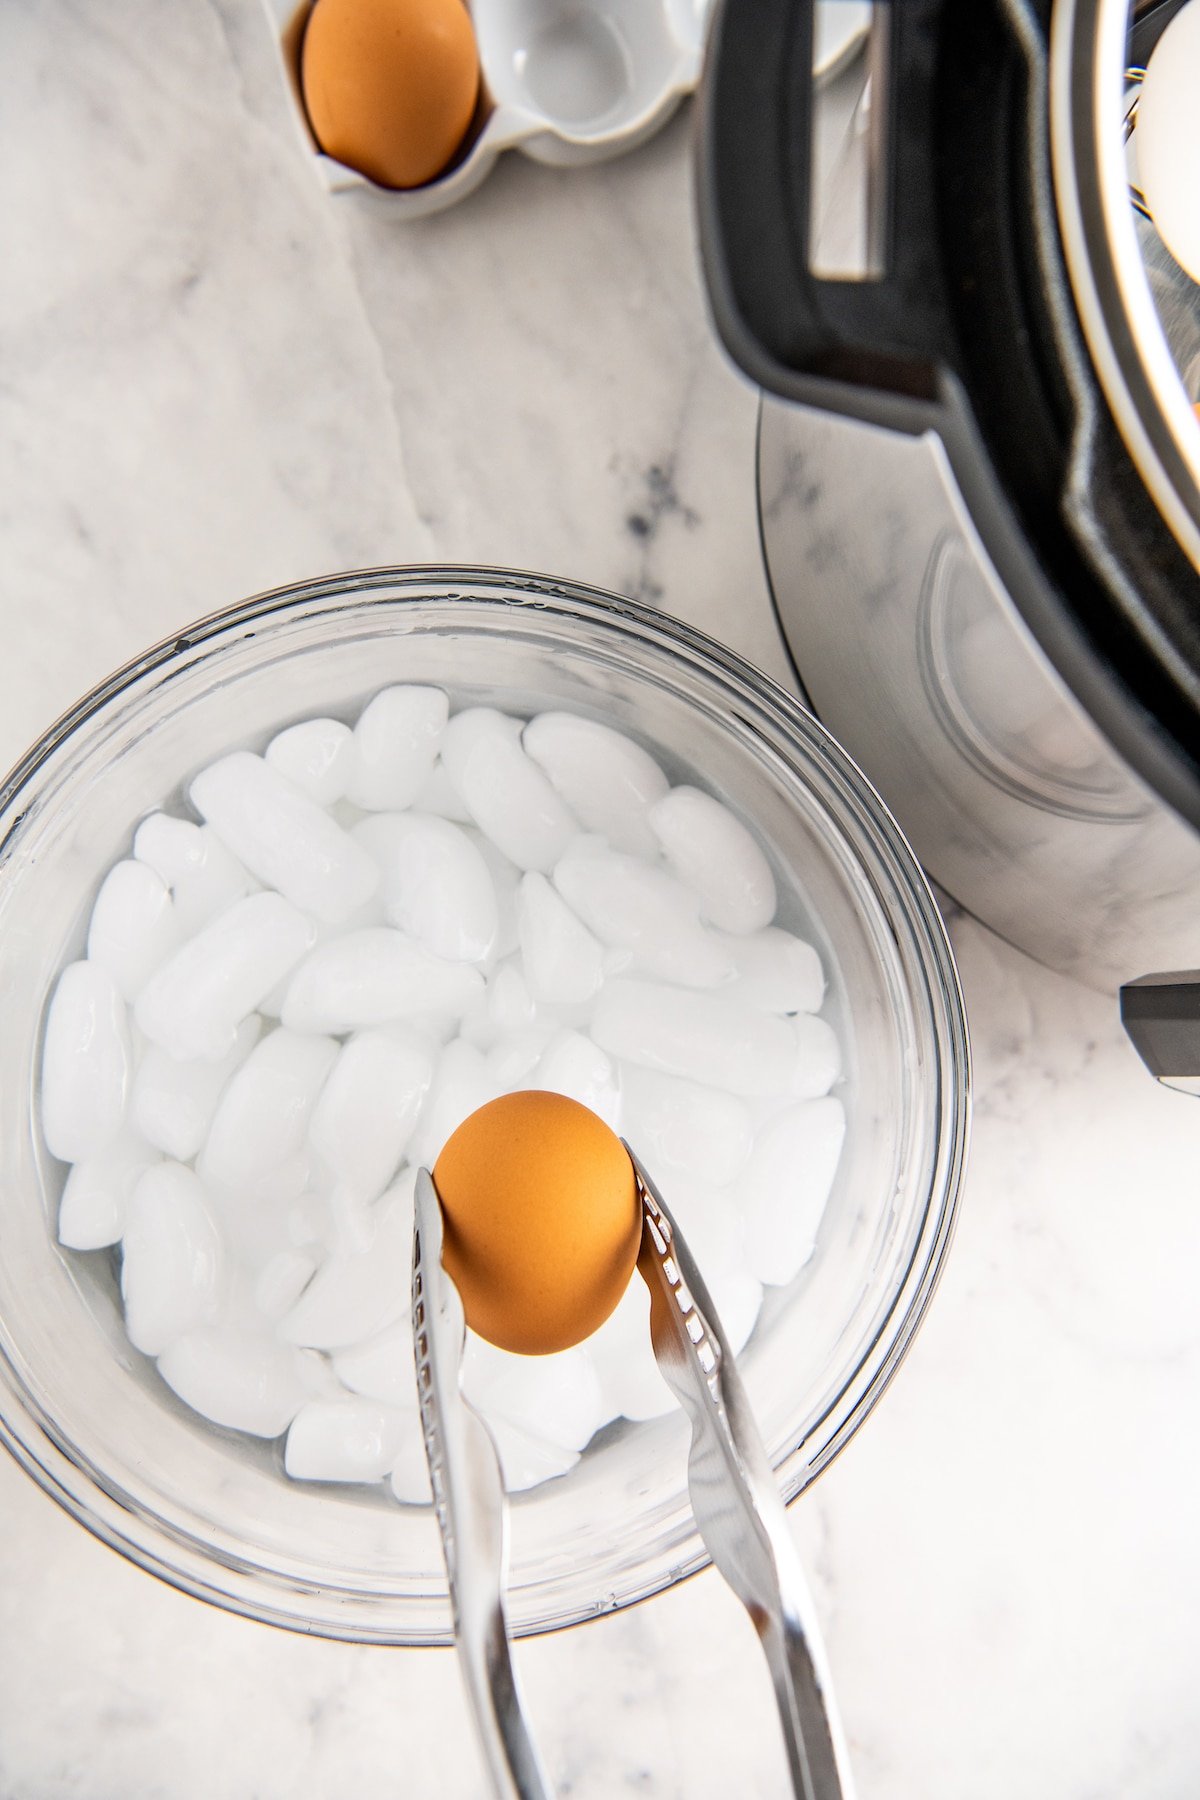 A bowl of ice water with a hard boiled egg being added to it with tongs.